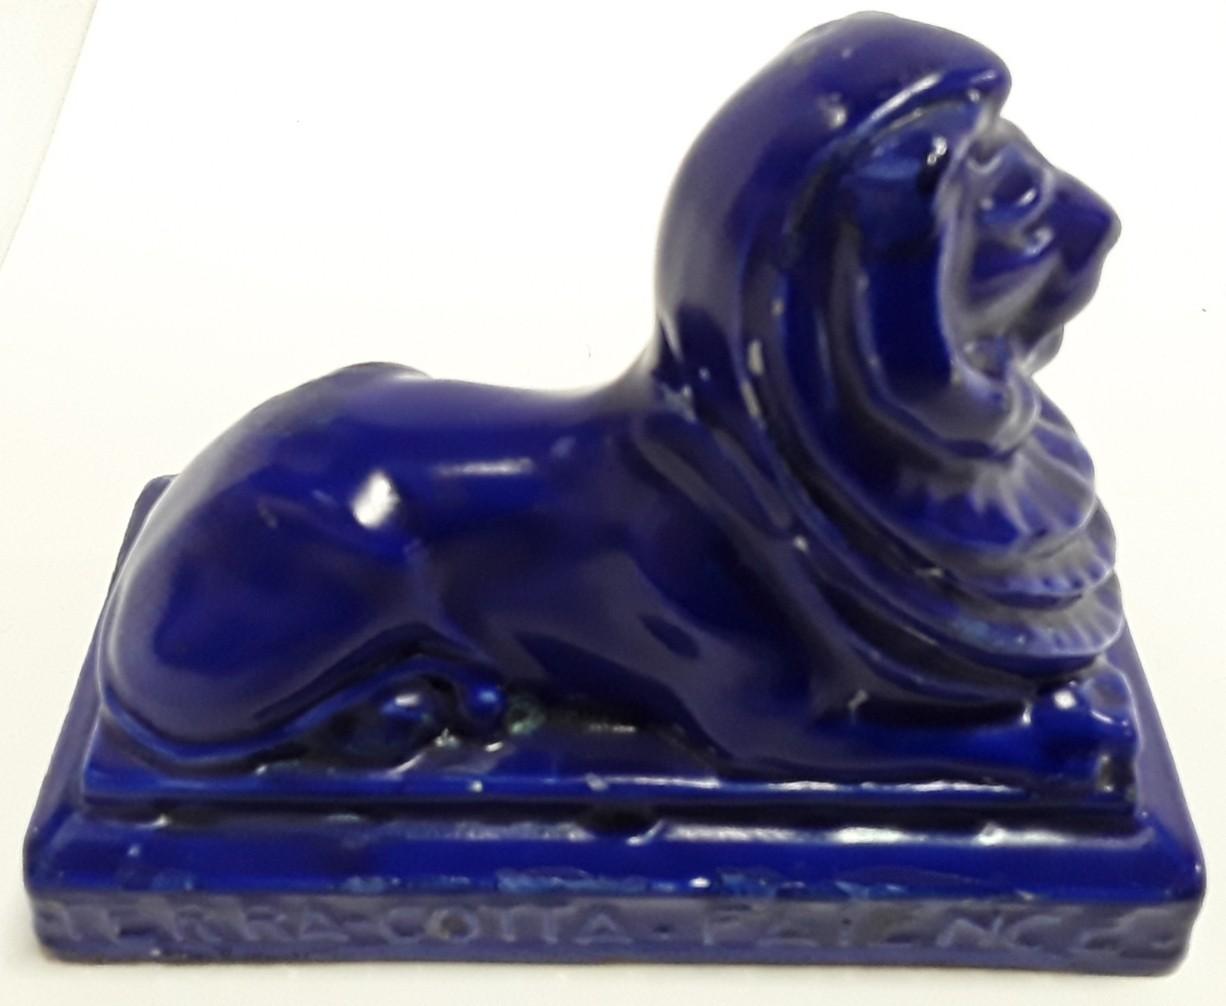 Carters & Co Poole Pottery advertising lion desk paperweight. - Image 3 of 5